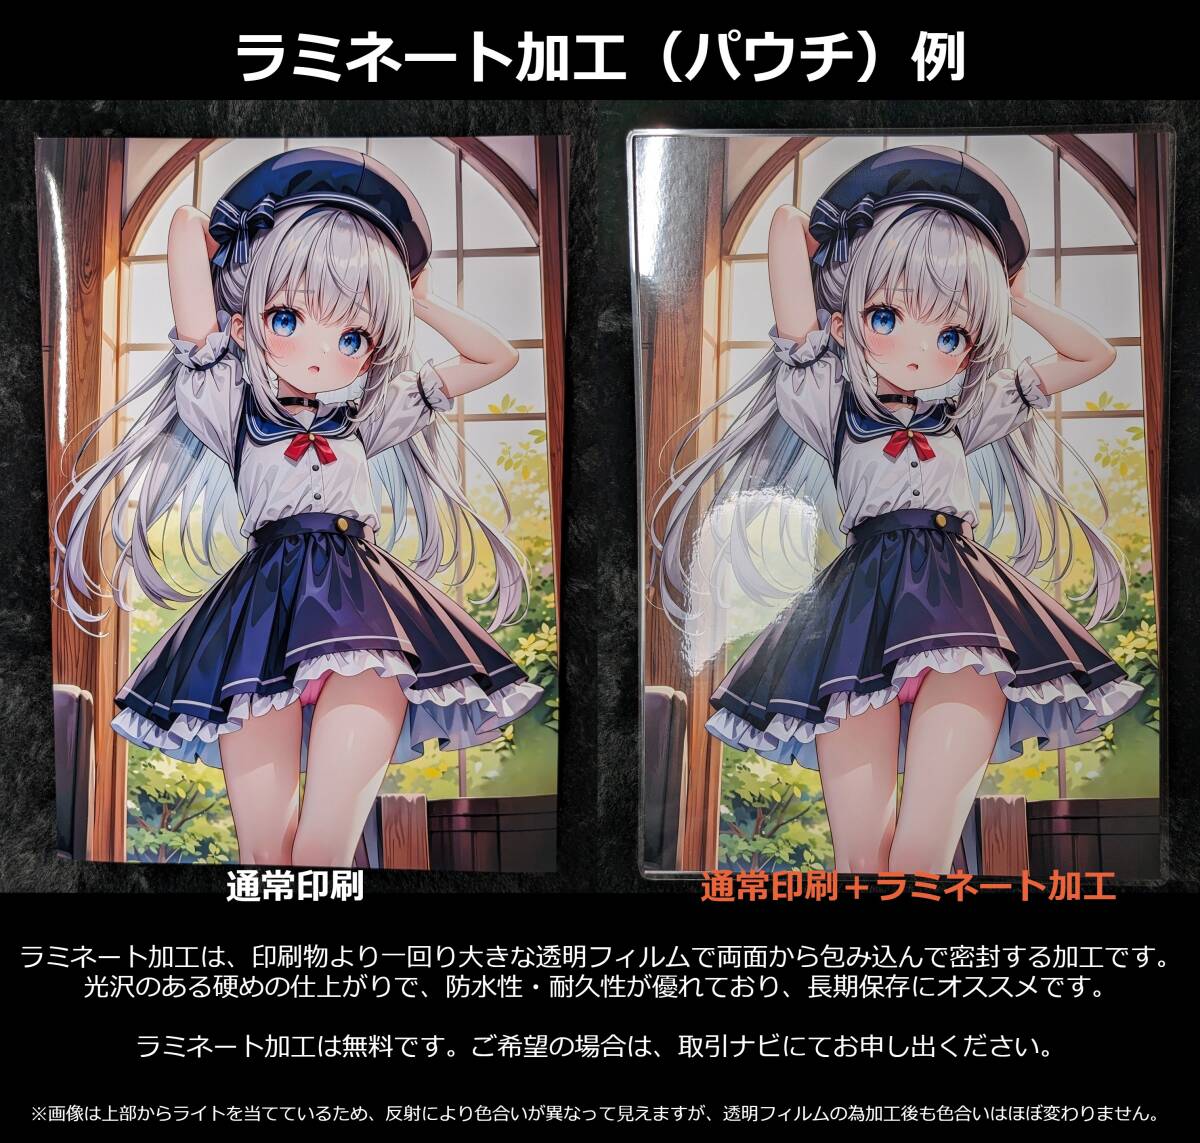 [ high resolution * extra / prompt decision privilege have ] anime series A4 original illustration art poster beautiful young lady beautiful woman beautiful . same person cosplay sexy underwear No.t1037